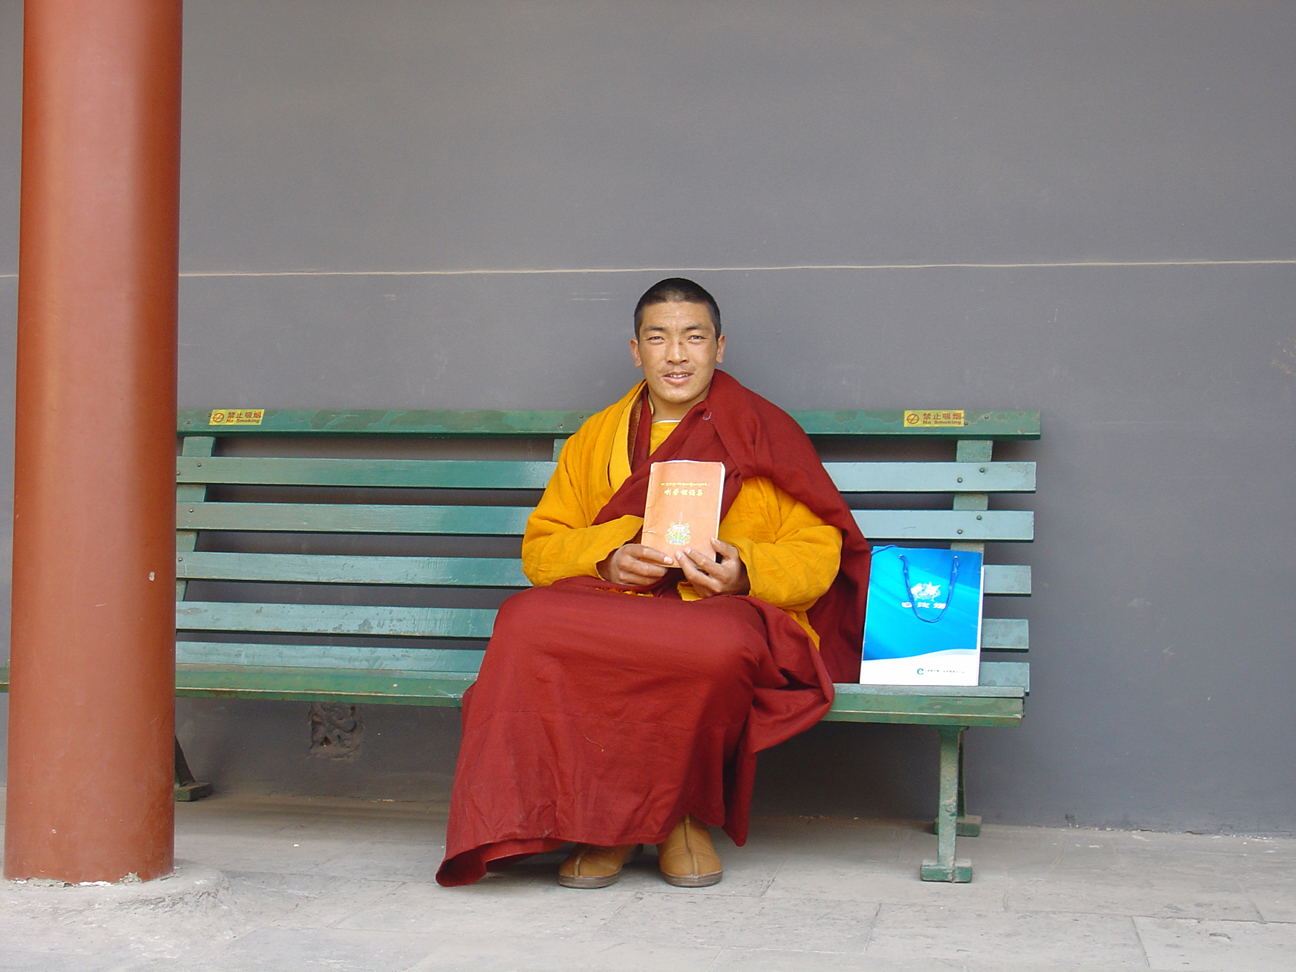 A Buddhist monk resting on a bench